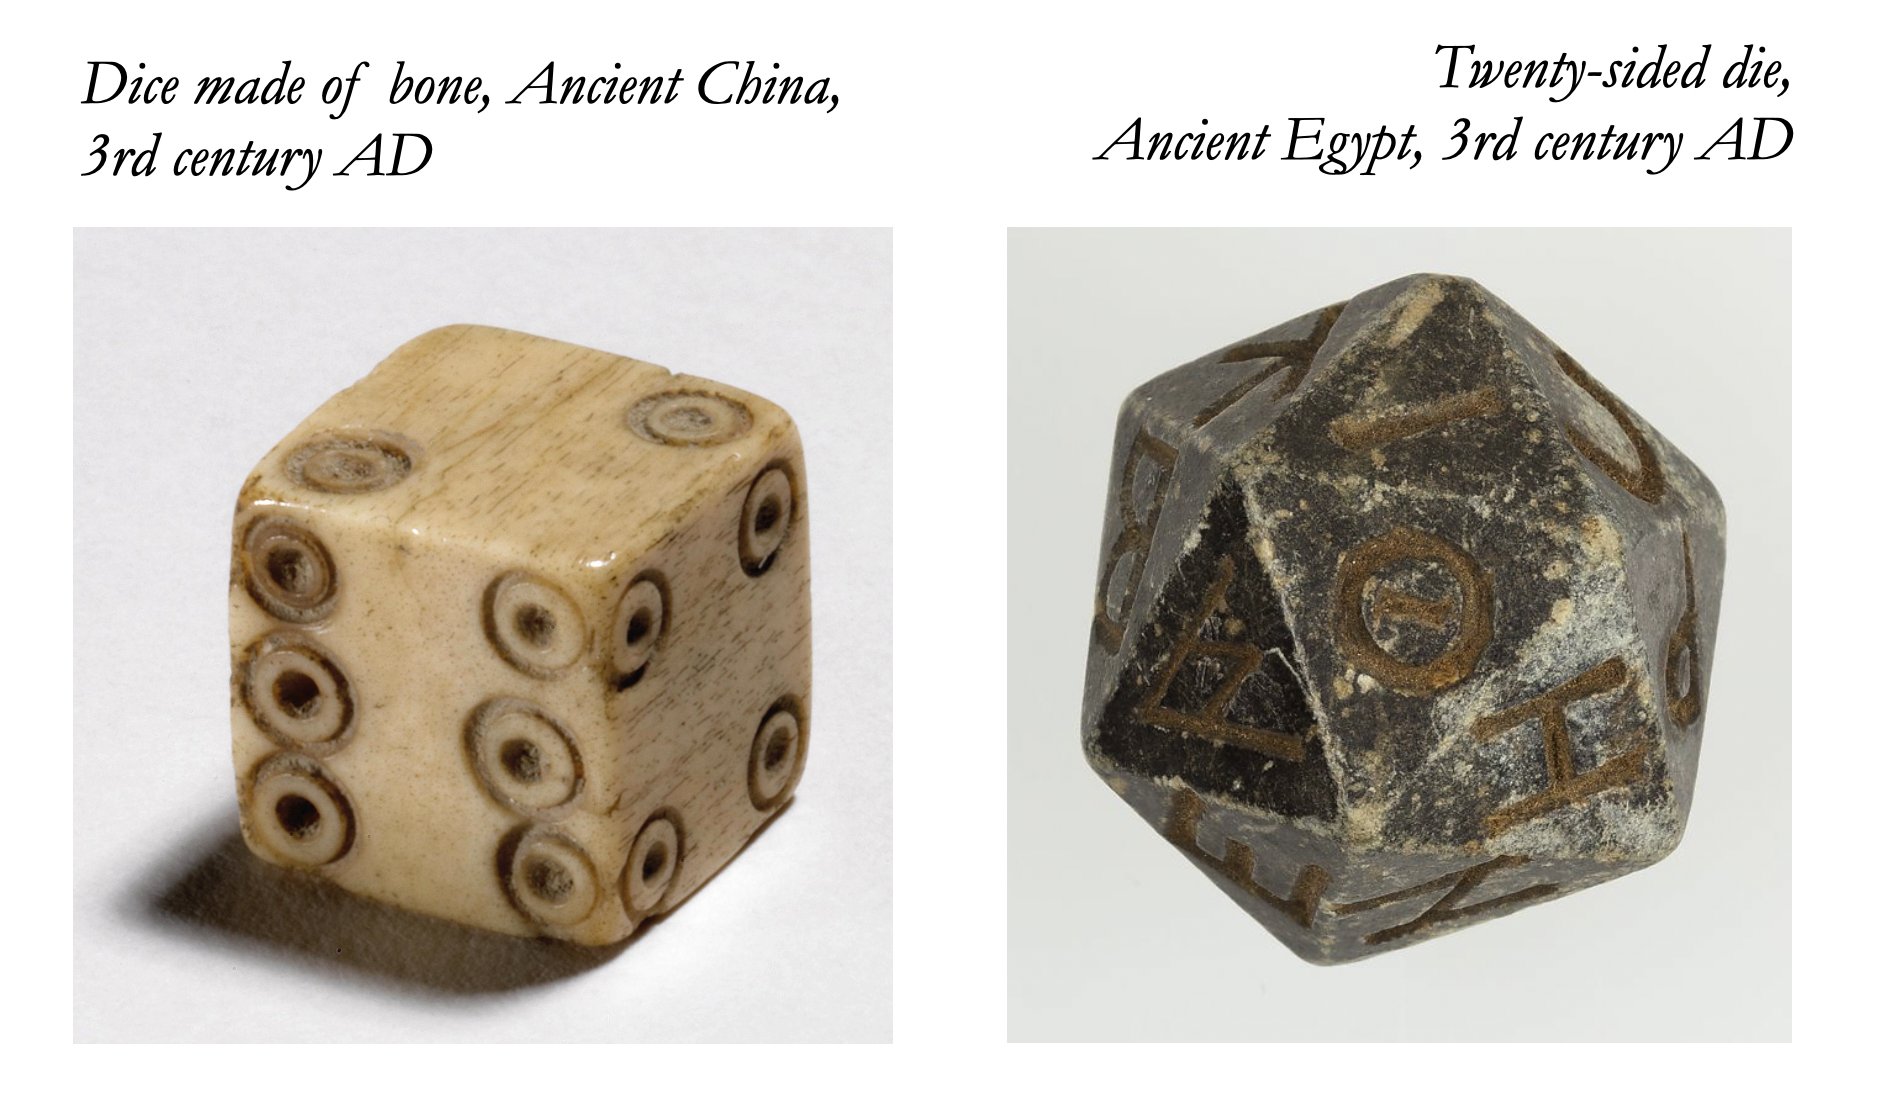 Dorsa Amir on X: The dice you roll today are almost identical to those  found in the past. In addition to the classic six-sided die, there are also  lots of polyhedral dice